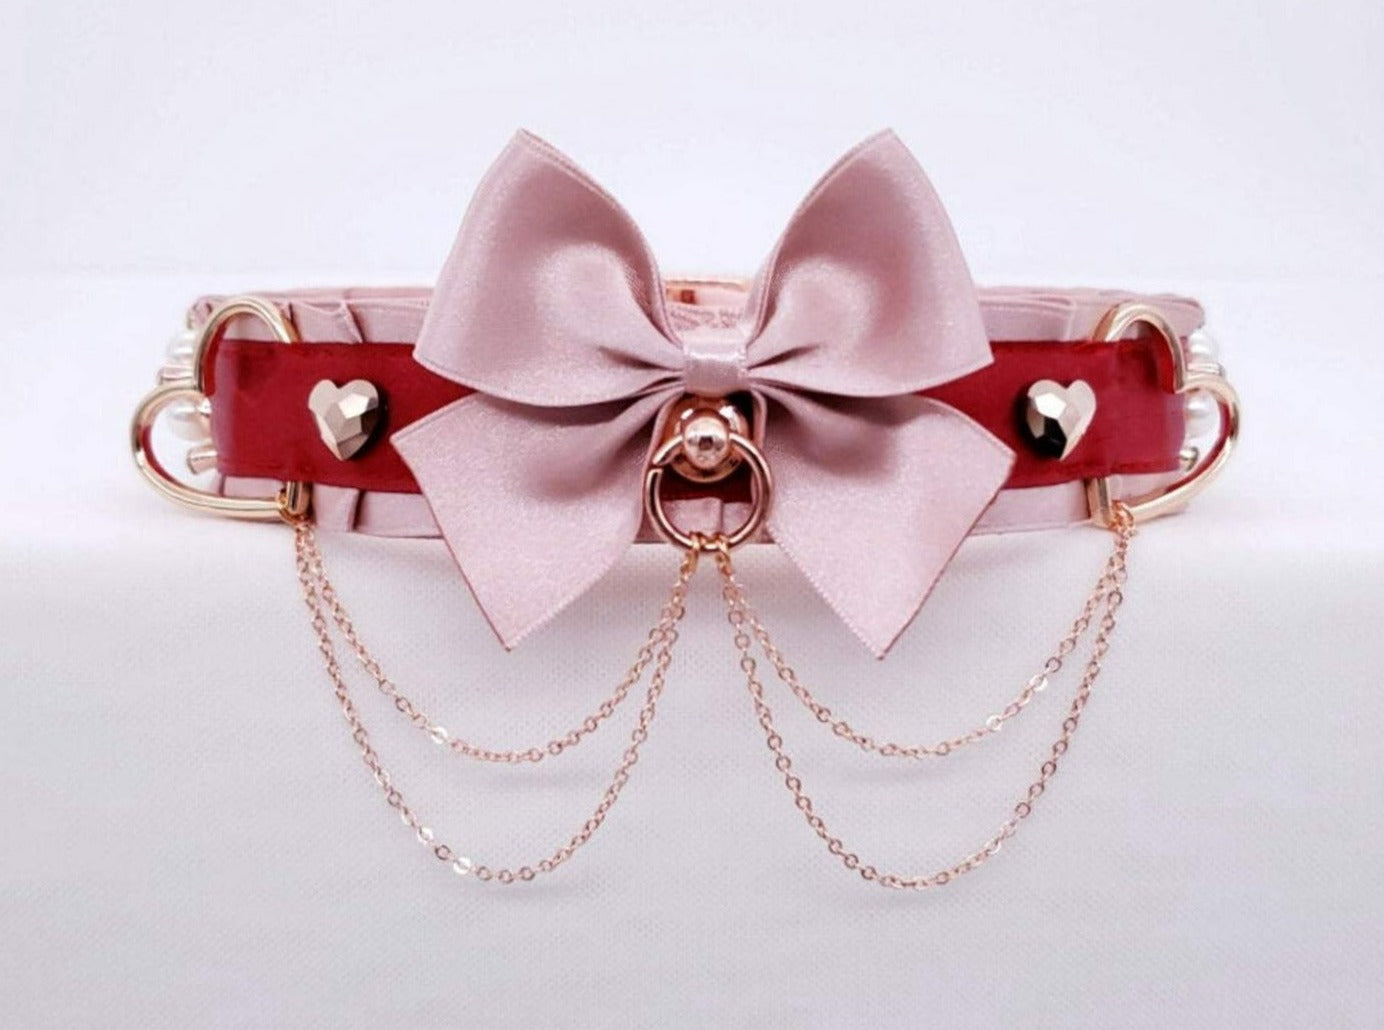 Dusty Rose and Red Luxury Rose Gold Heart Collar